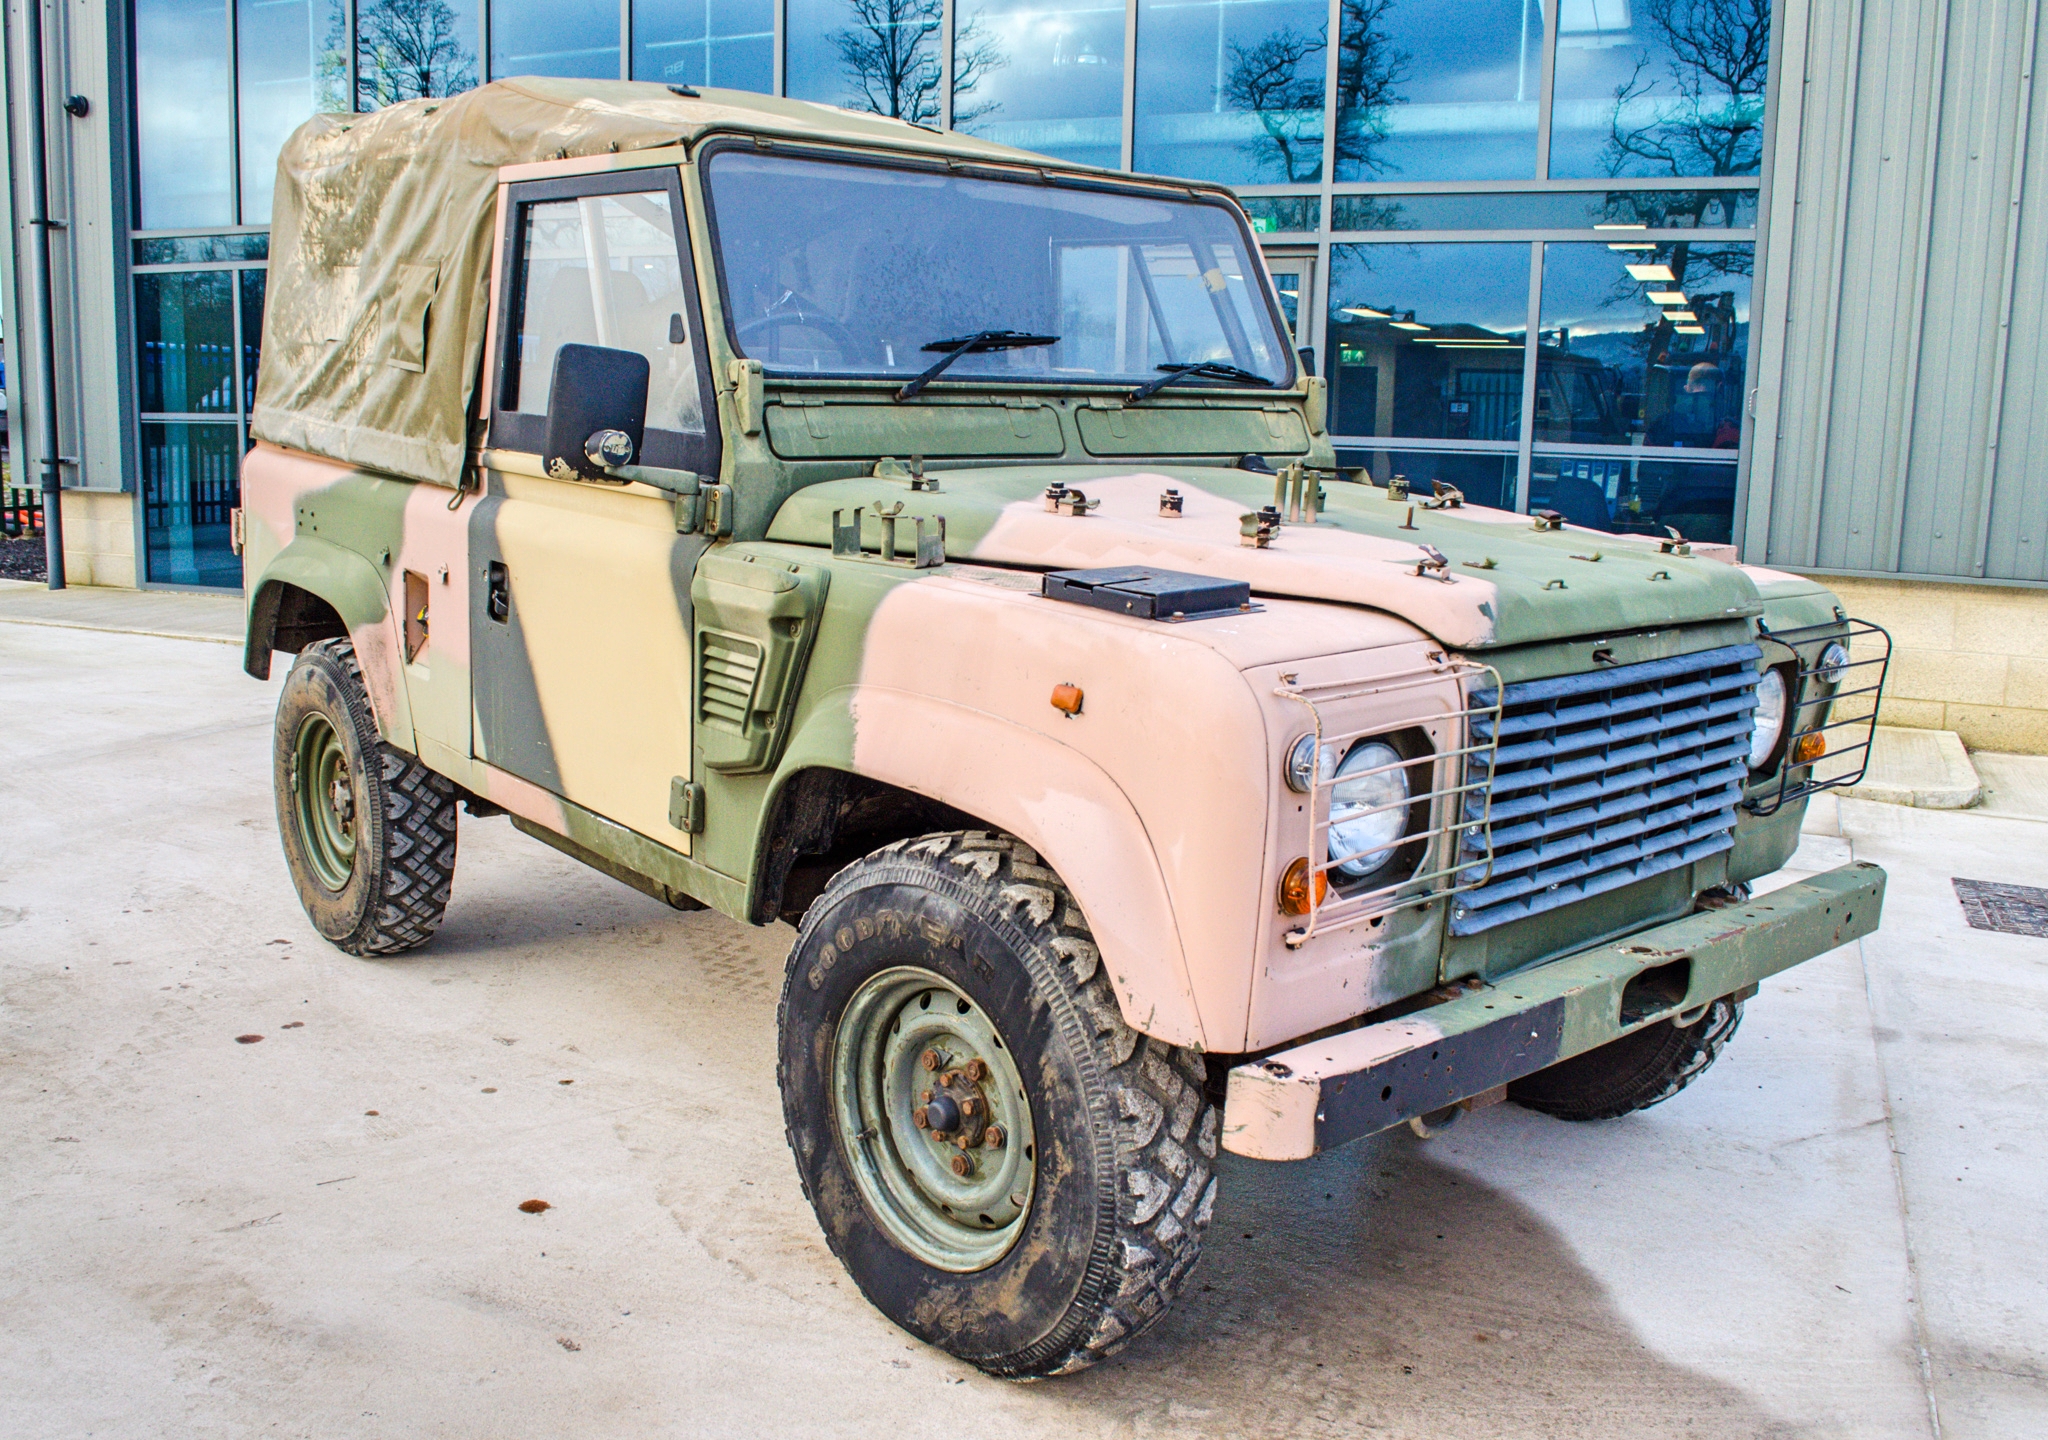 1998 Land Rover Defender 90 WOLF 2,5 litre 300TDI 4 wheel drive utility vehicle Ex MOD - Image 2 of 44